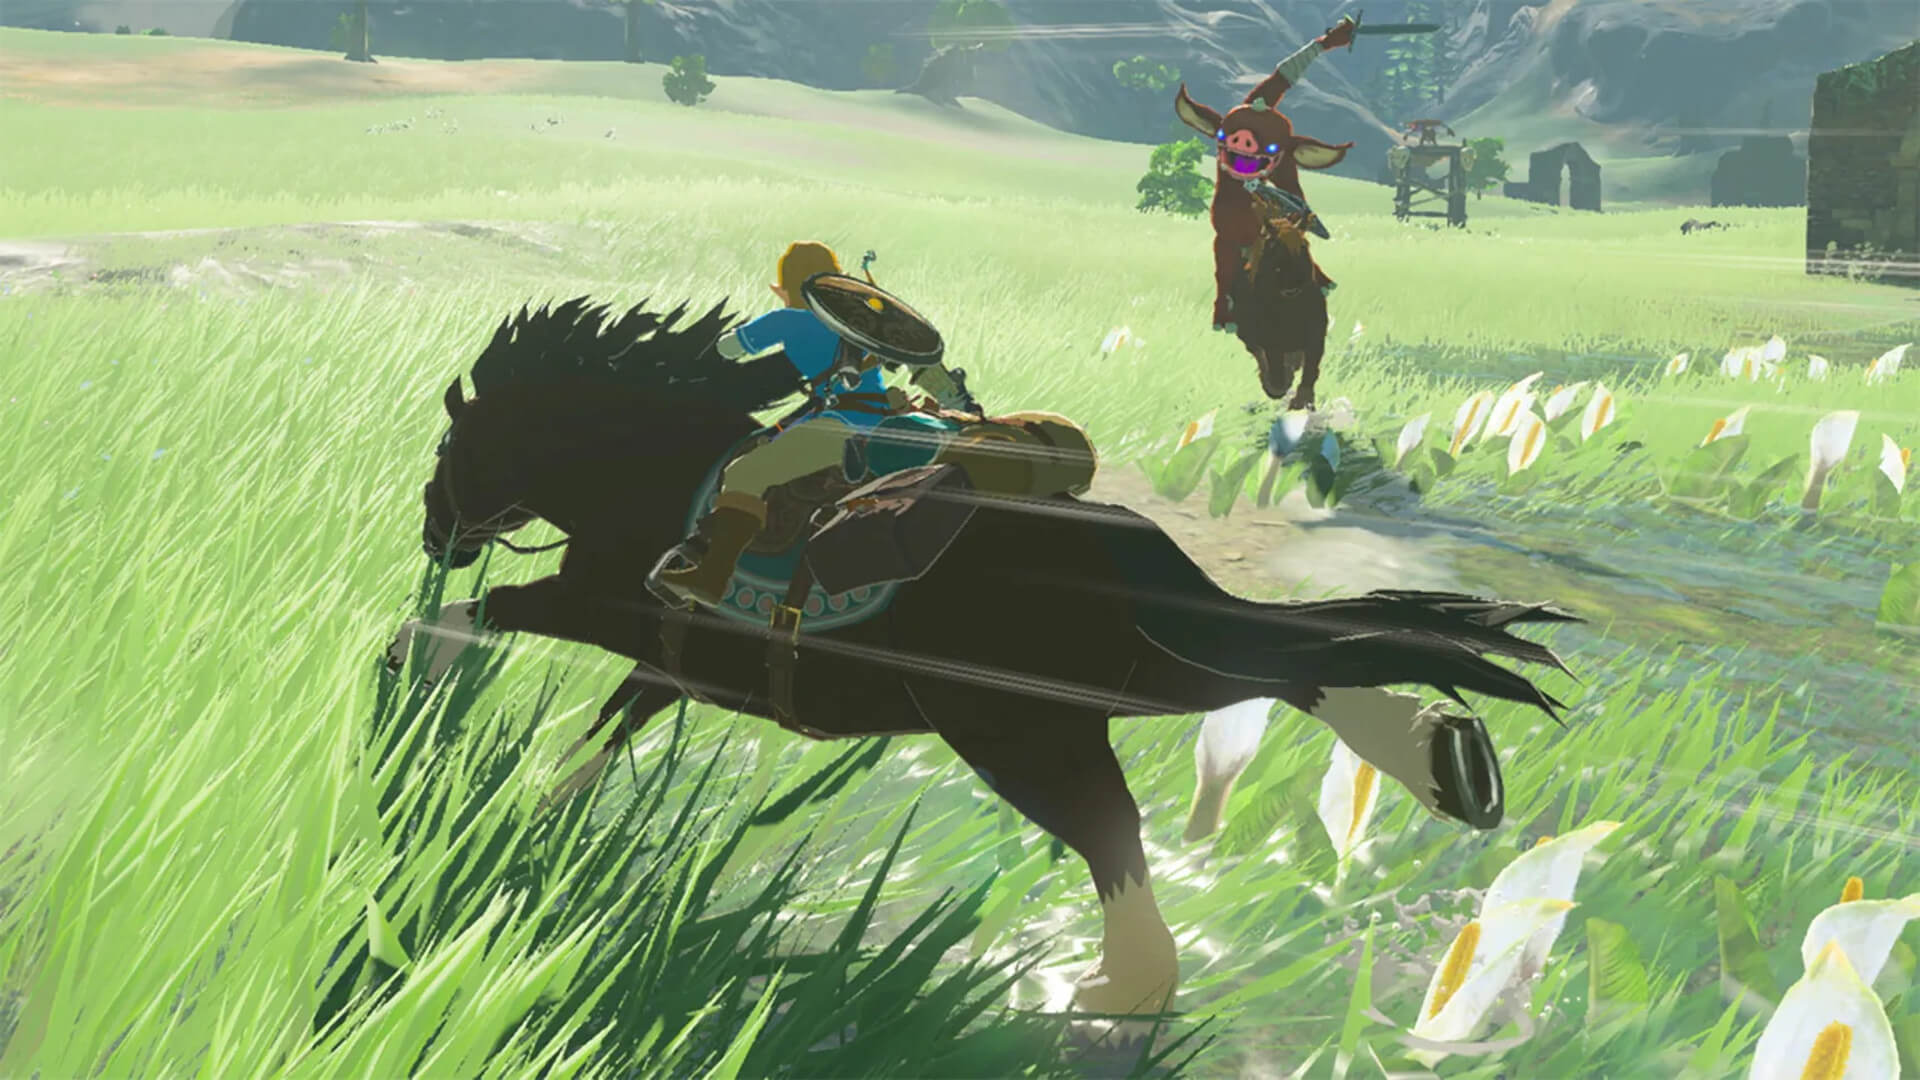 Link circling a Bokoblin on horseback in Breath of the Wild, representing the new Denuvo Switch DRM